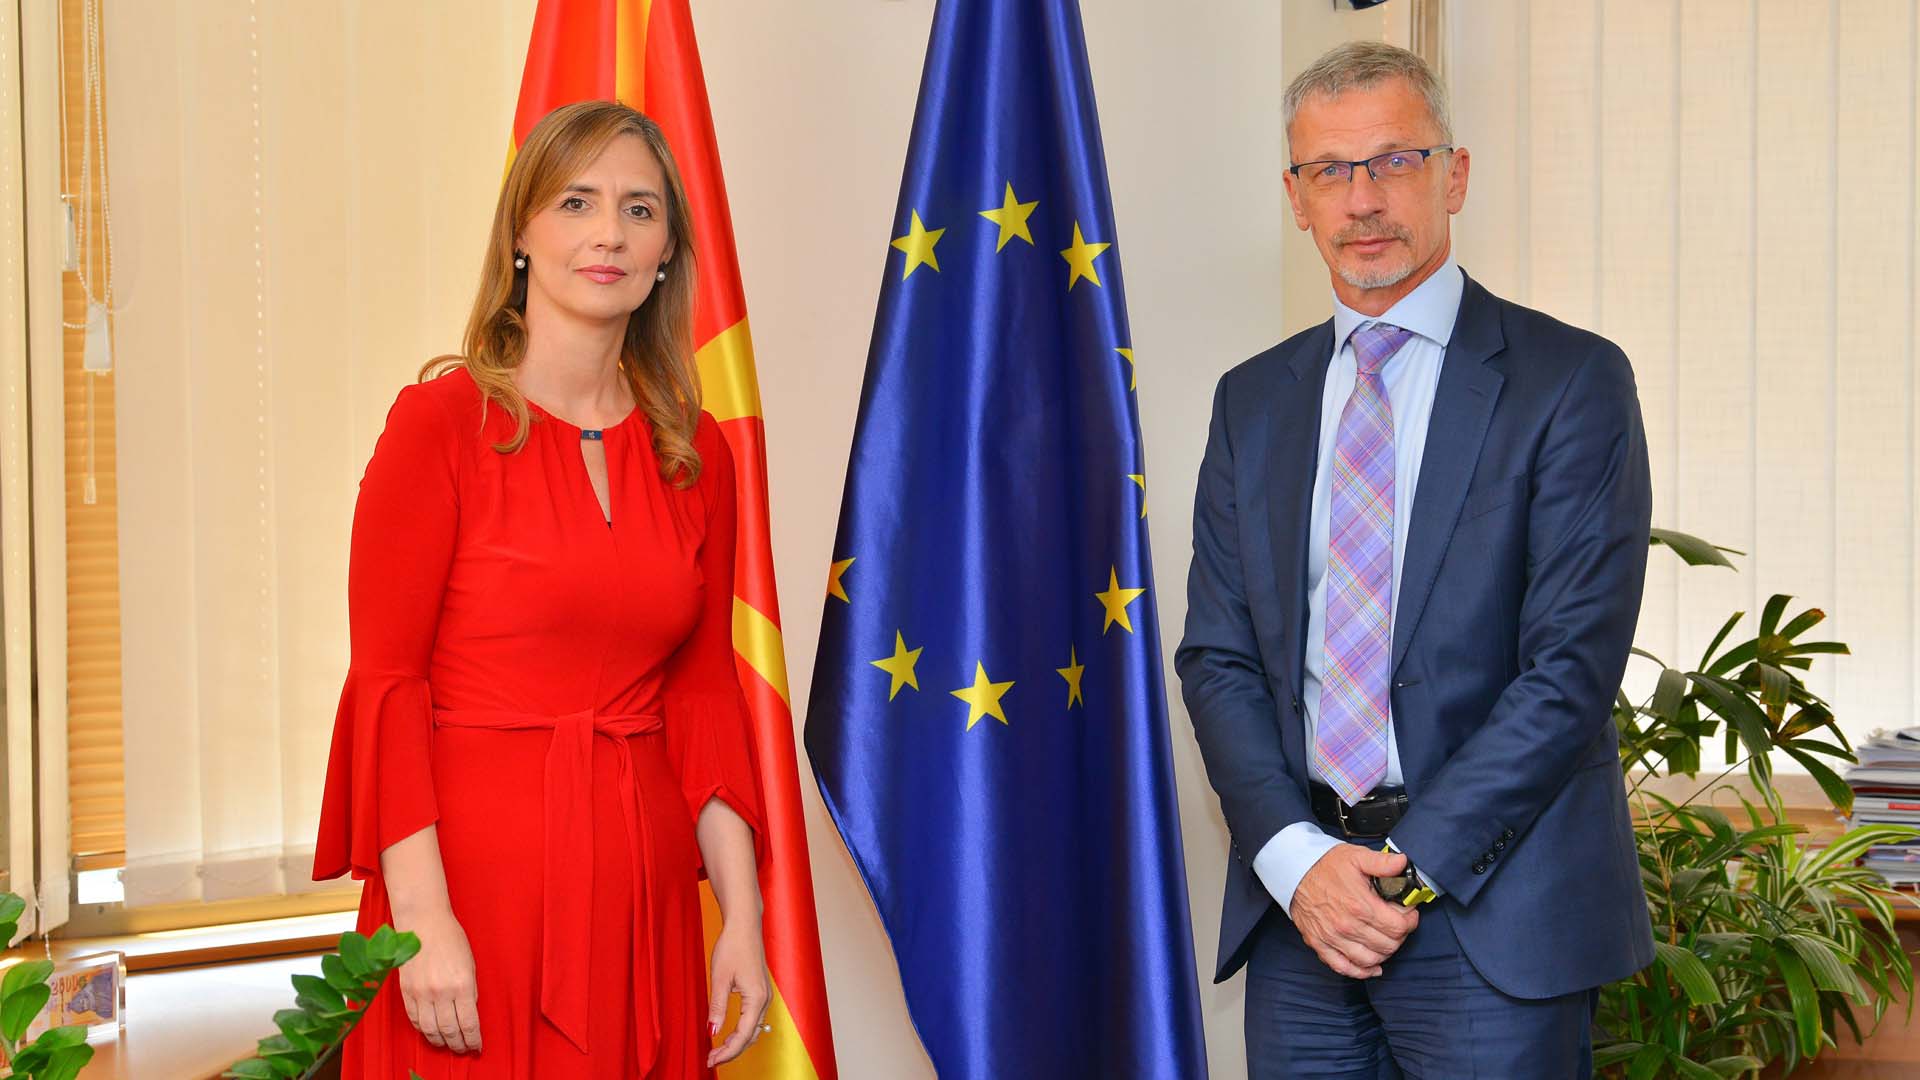 Croatian National Bank and National Bank of the Republic of North Macedonia sign Memorandum of Understanding concerning cooperation and exchange of information